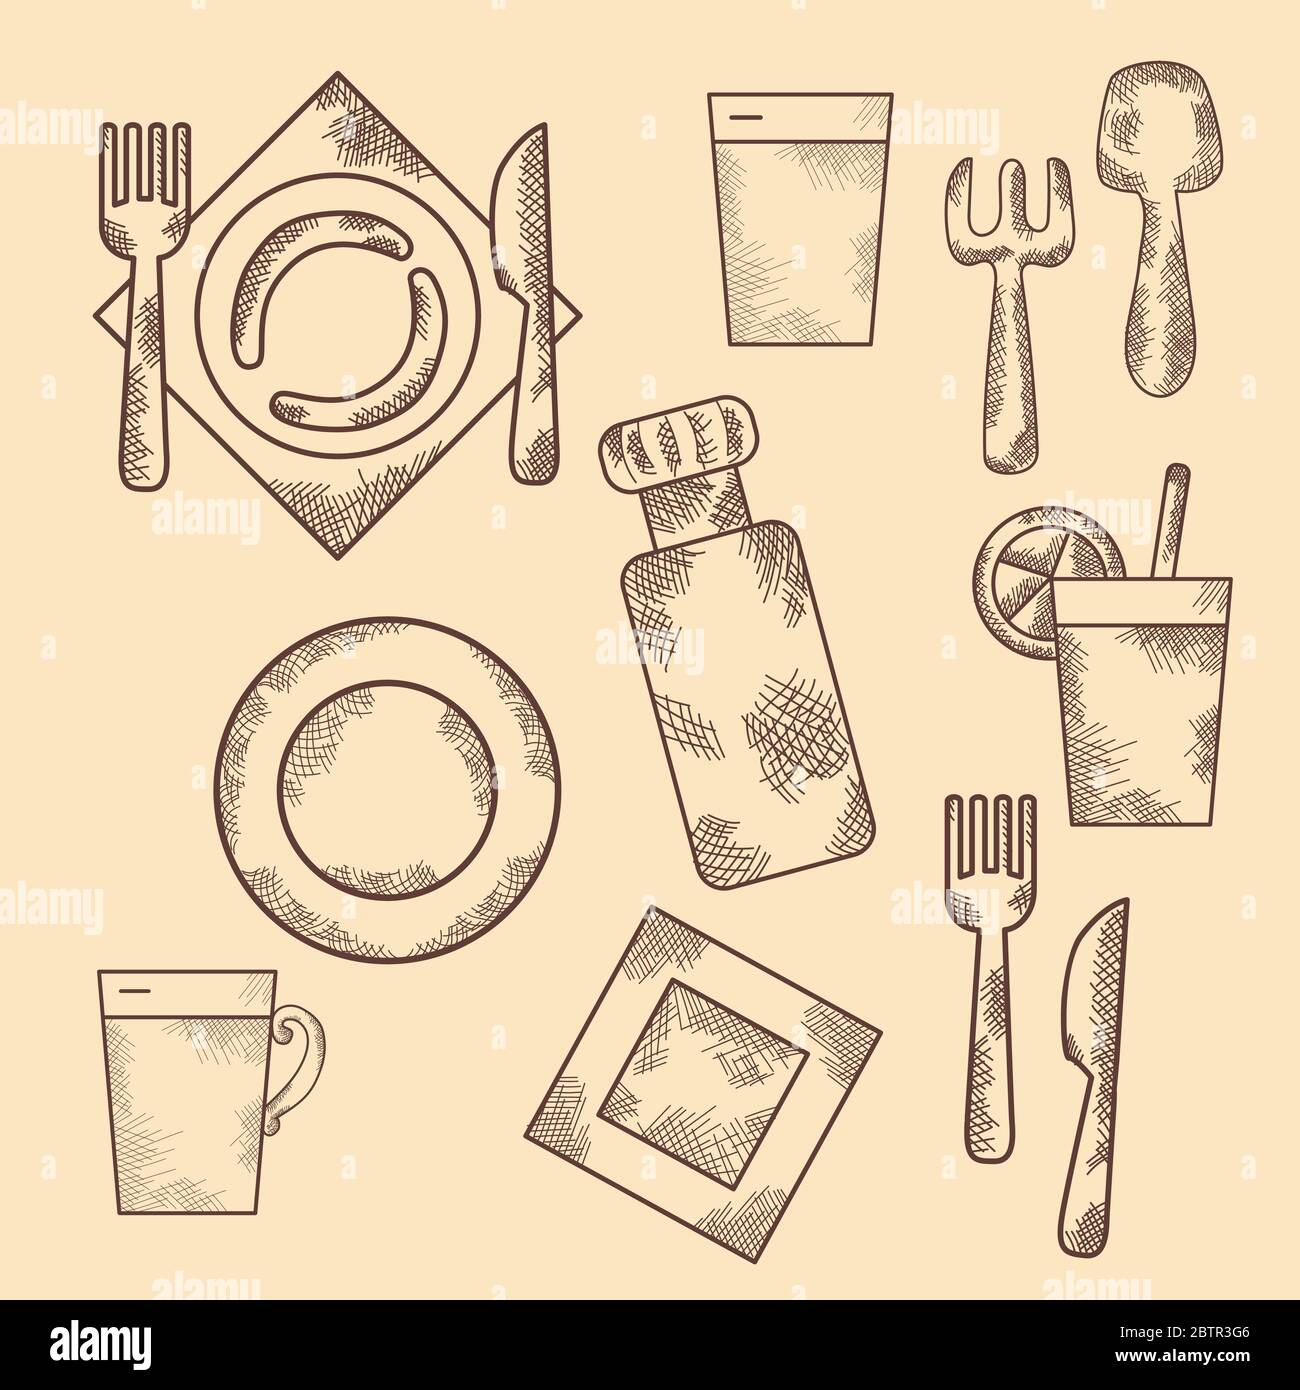 Hand drawn set of doodles icons. Vintage. Dishes, objects, appliances. Stock Vector